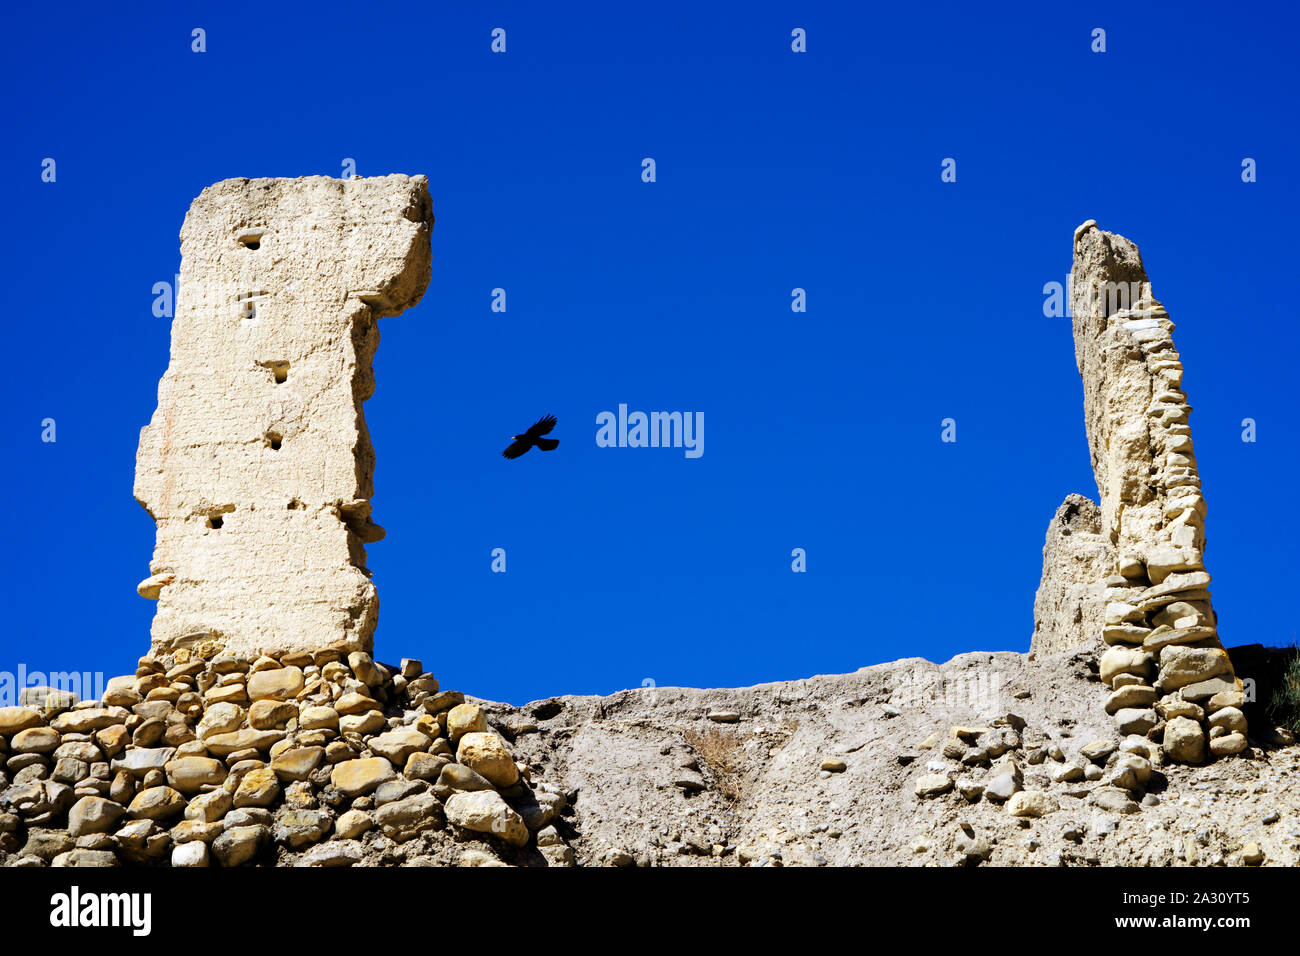 Alpine chough soaring amongst the ruins of an ancient gompa in Chuksang, Upper Mustang region, Nepal. Stock Photo